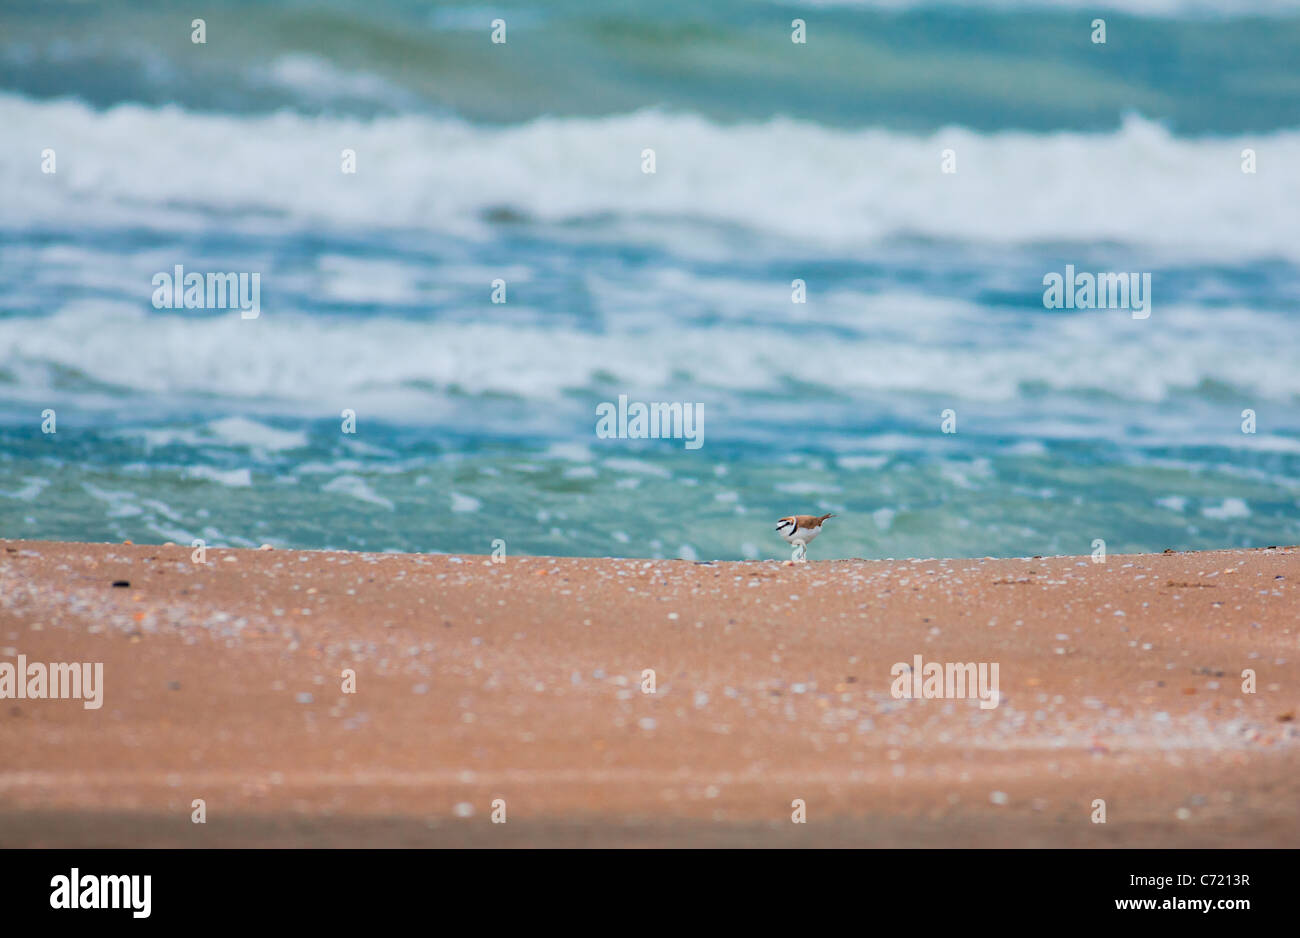 Ringed plover searching for food at Karatas beach, Turkey. Stock Photo